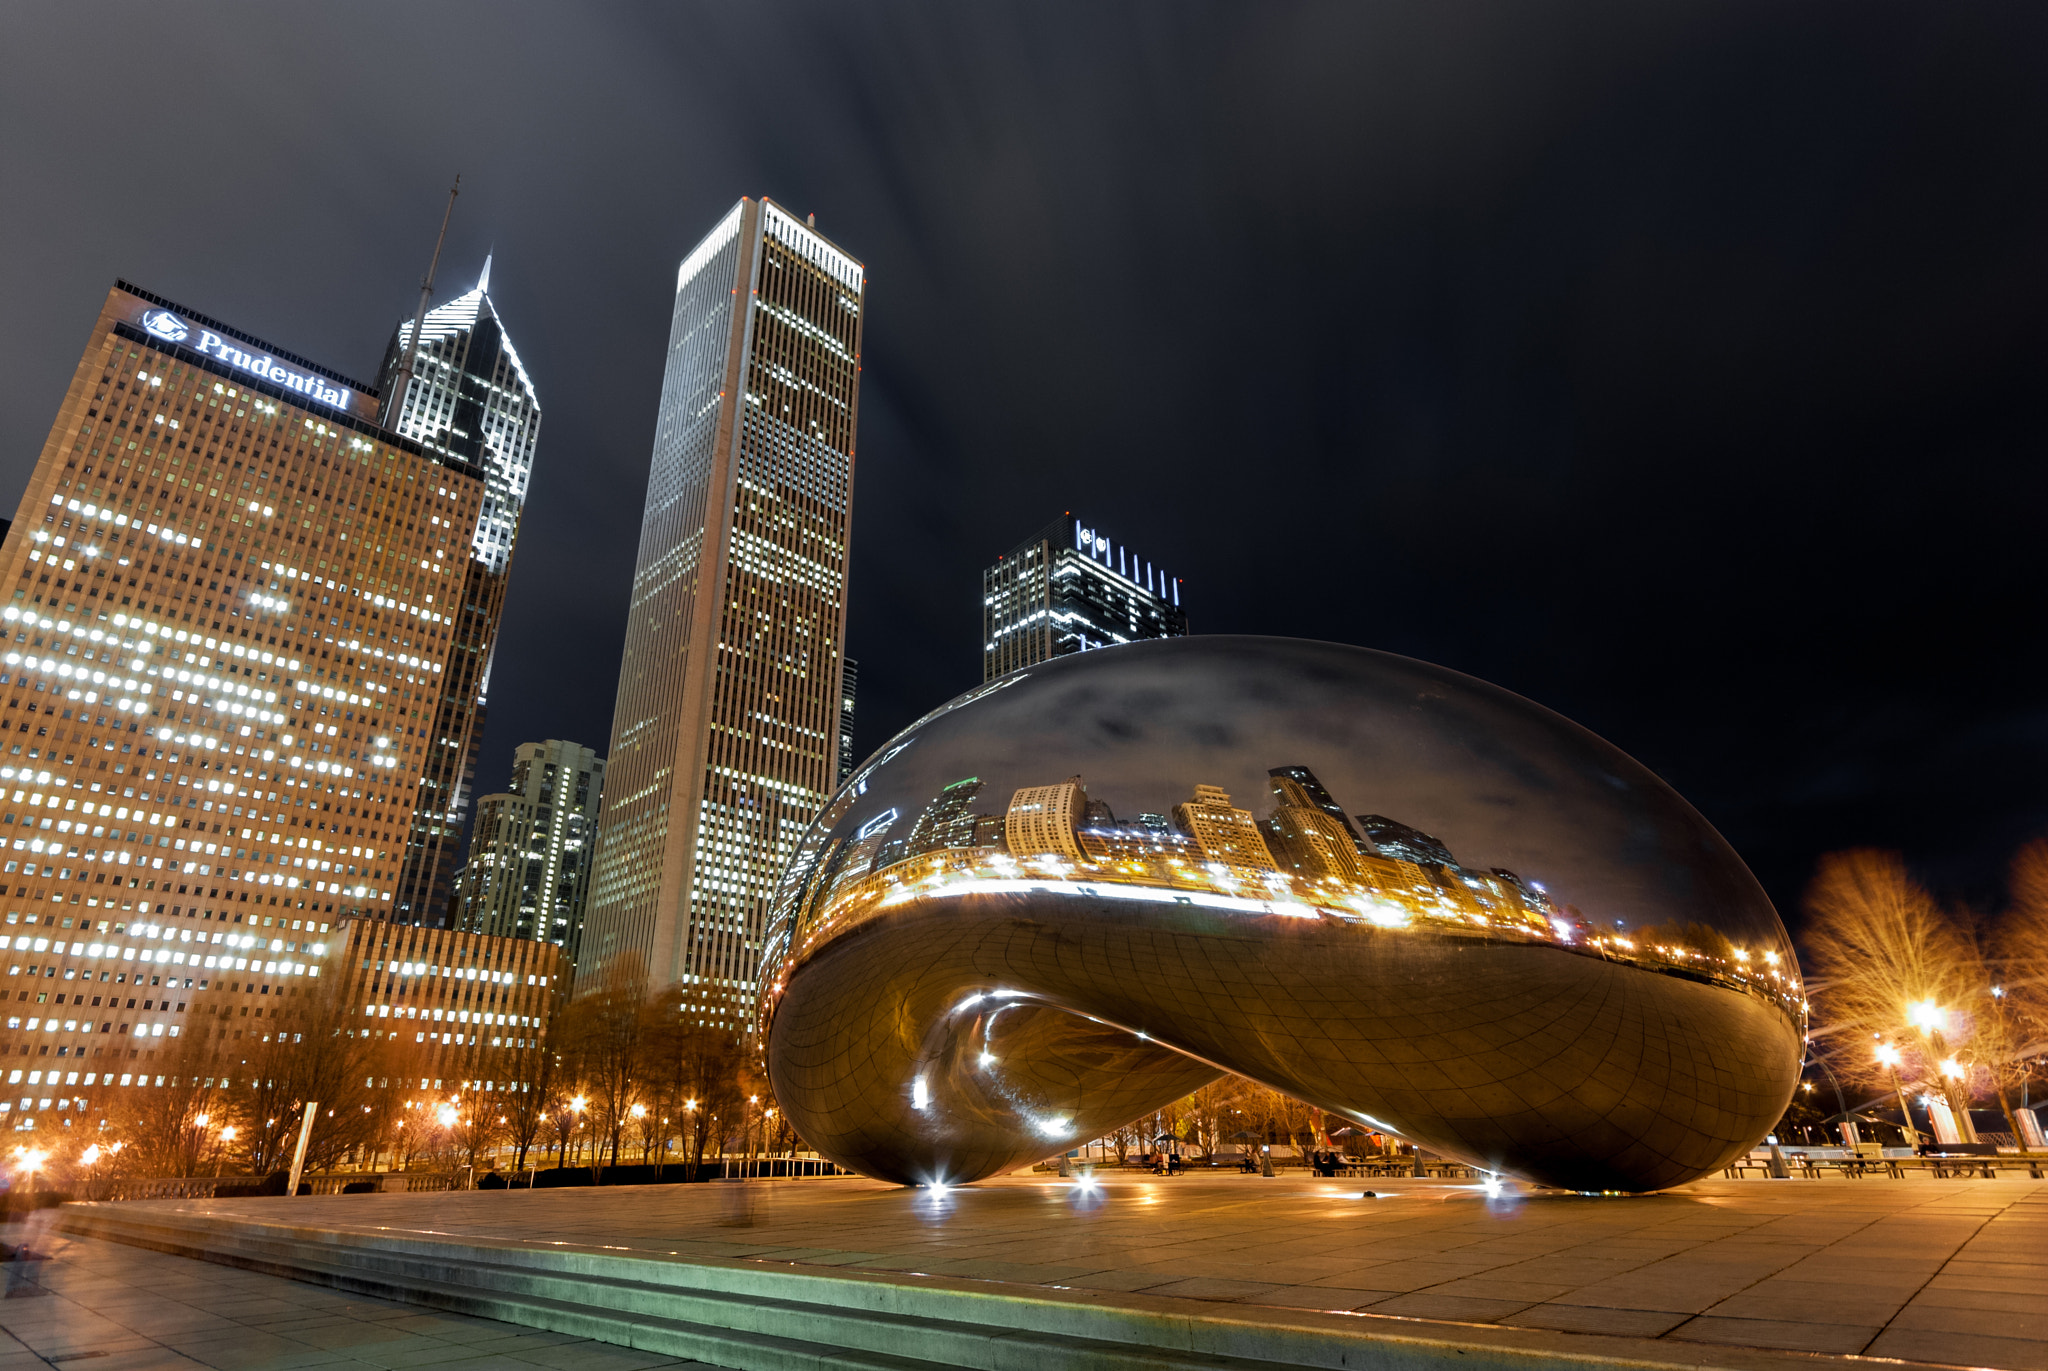 Nikon D80 sample photo. Cloud gate at night, chicago photography